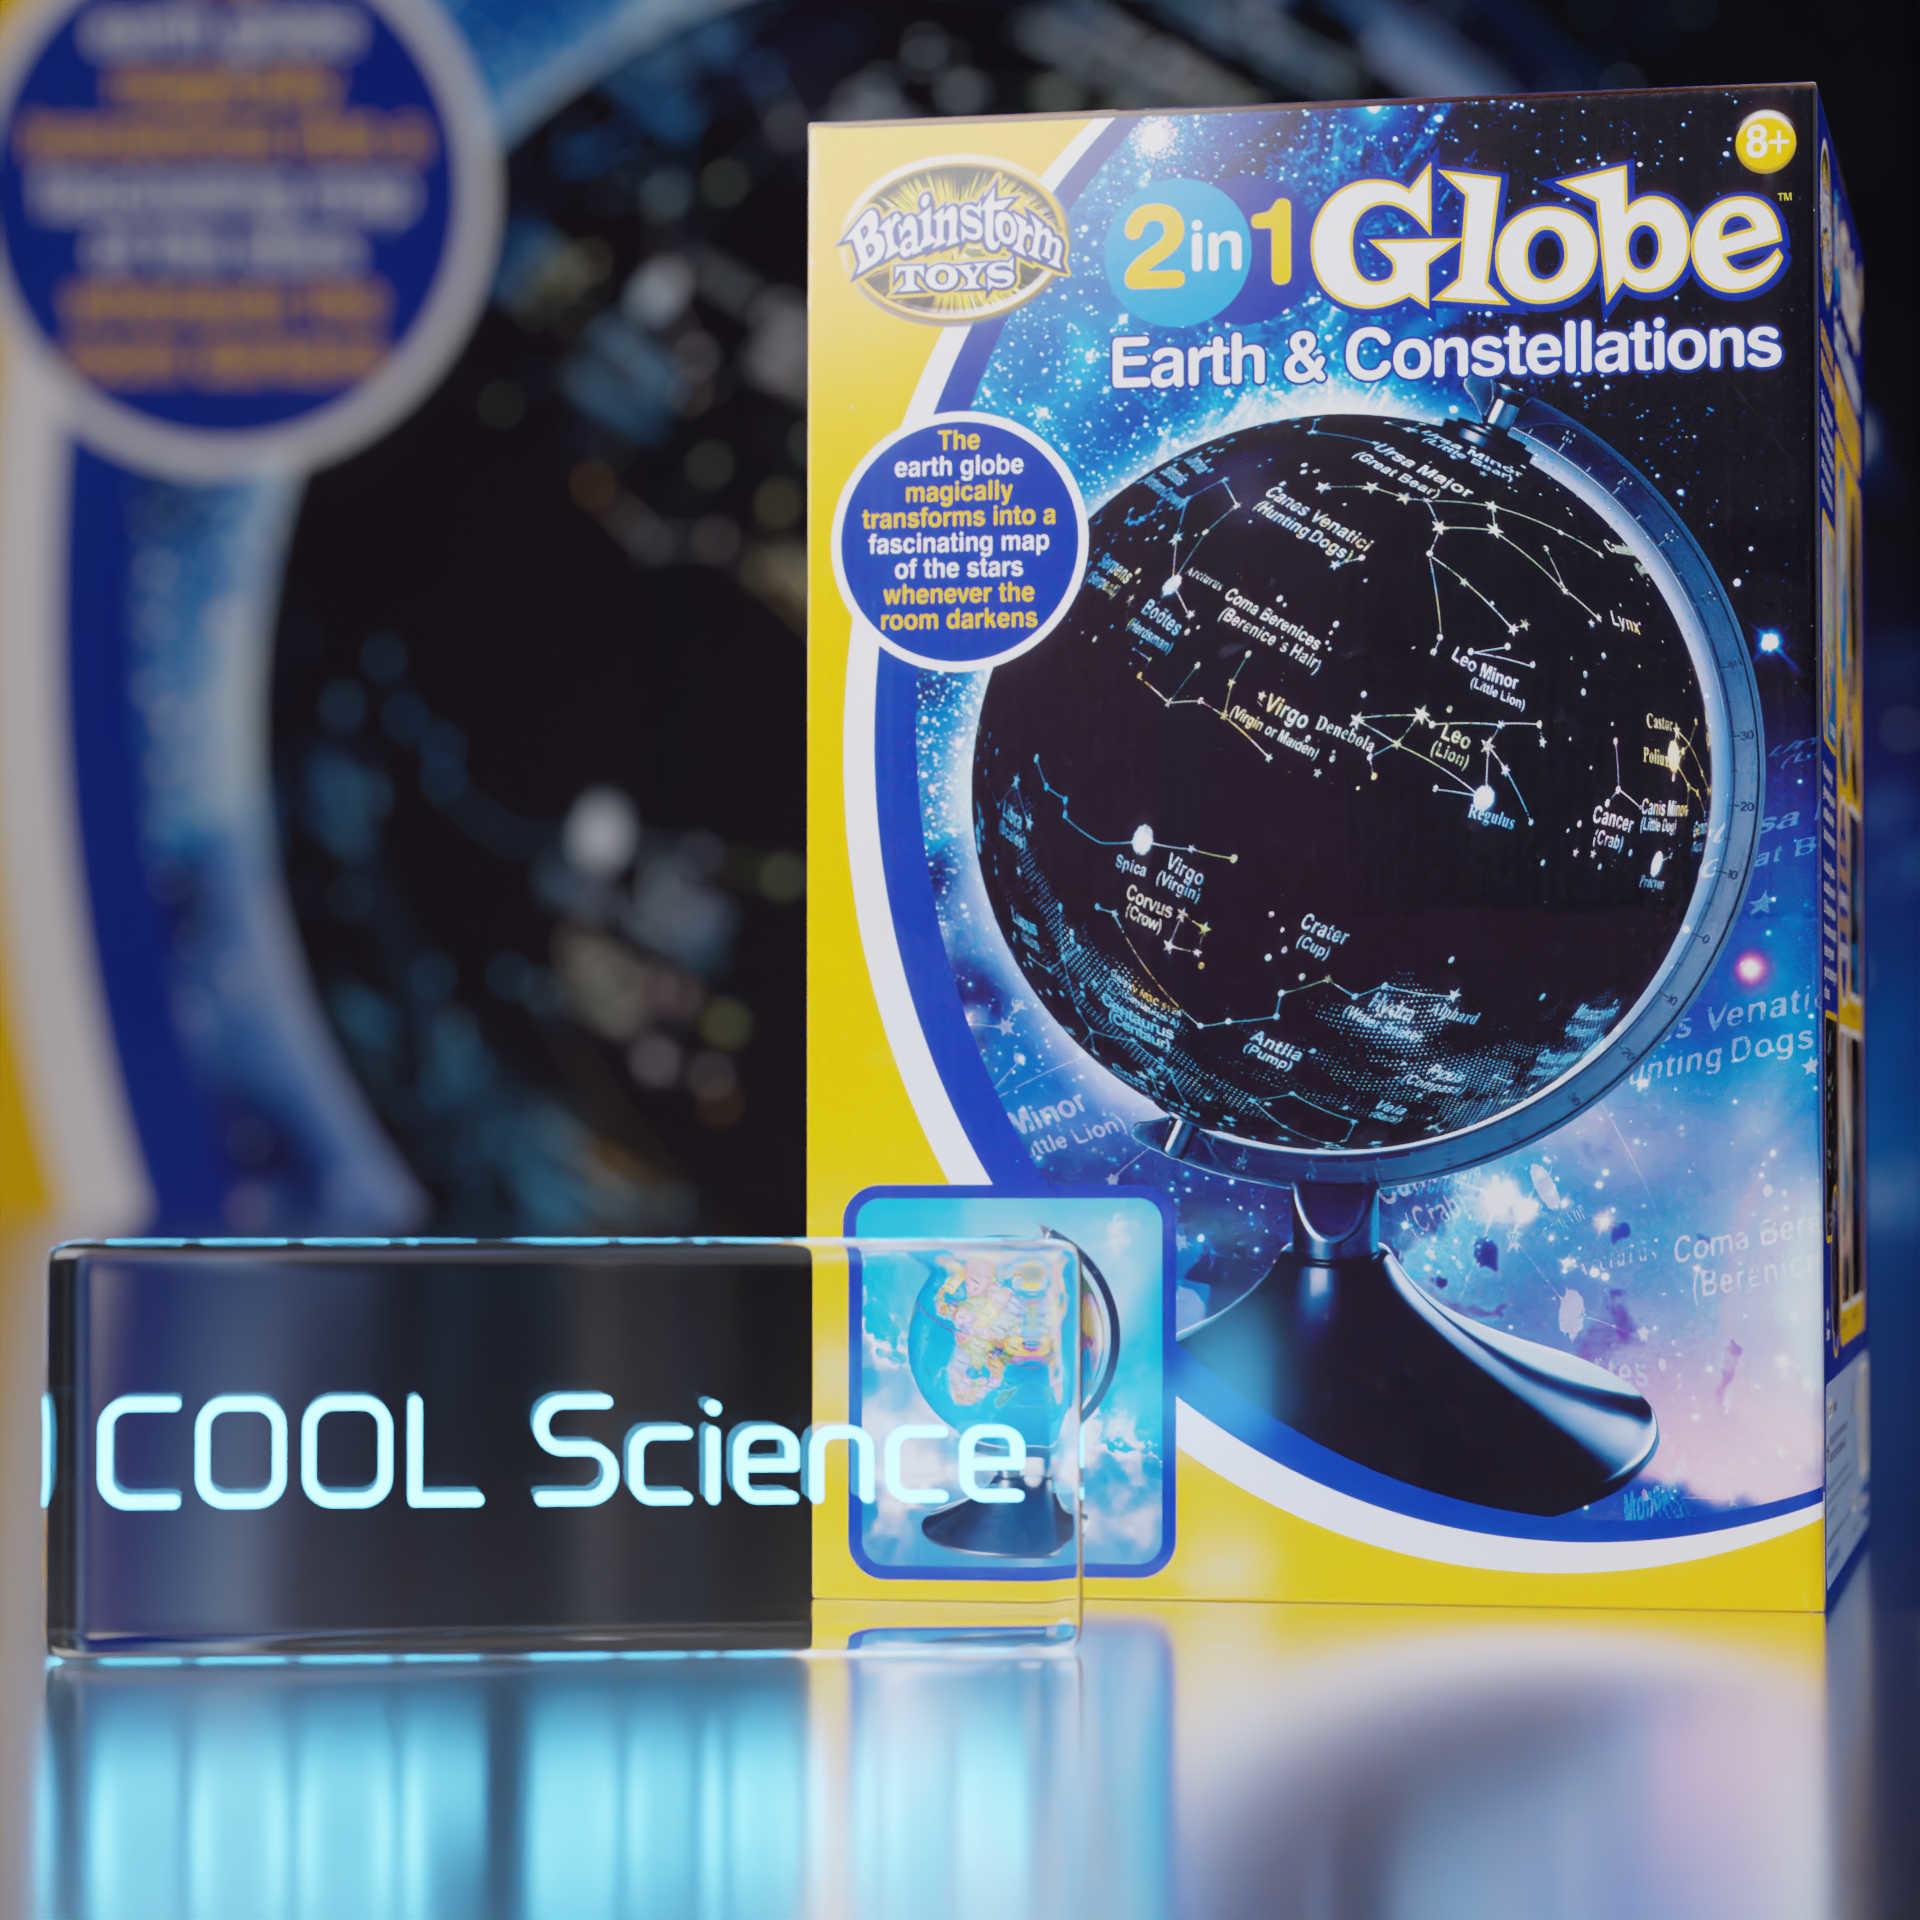 Right Side View of the Brainstorm Toys 2 in 1 Globe Earth & Constellations box shows a picture of the Globe star map